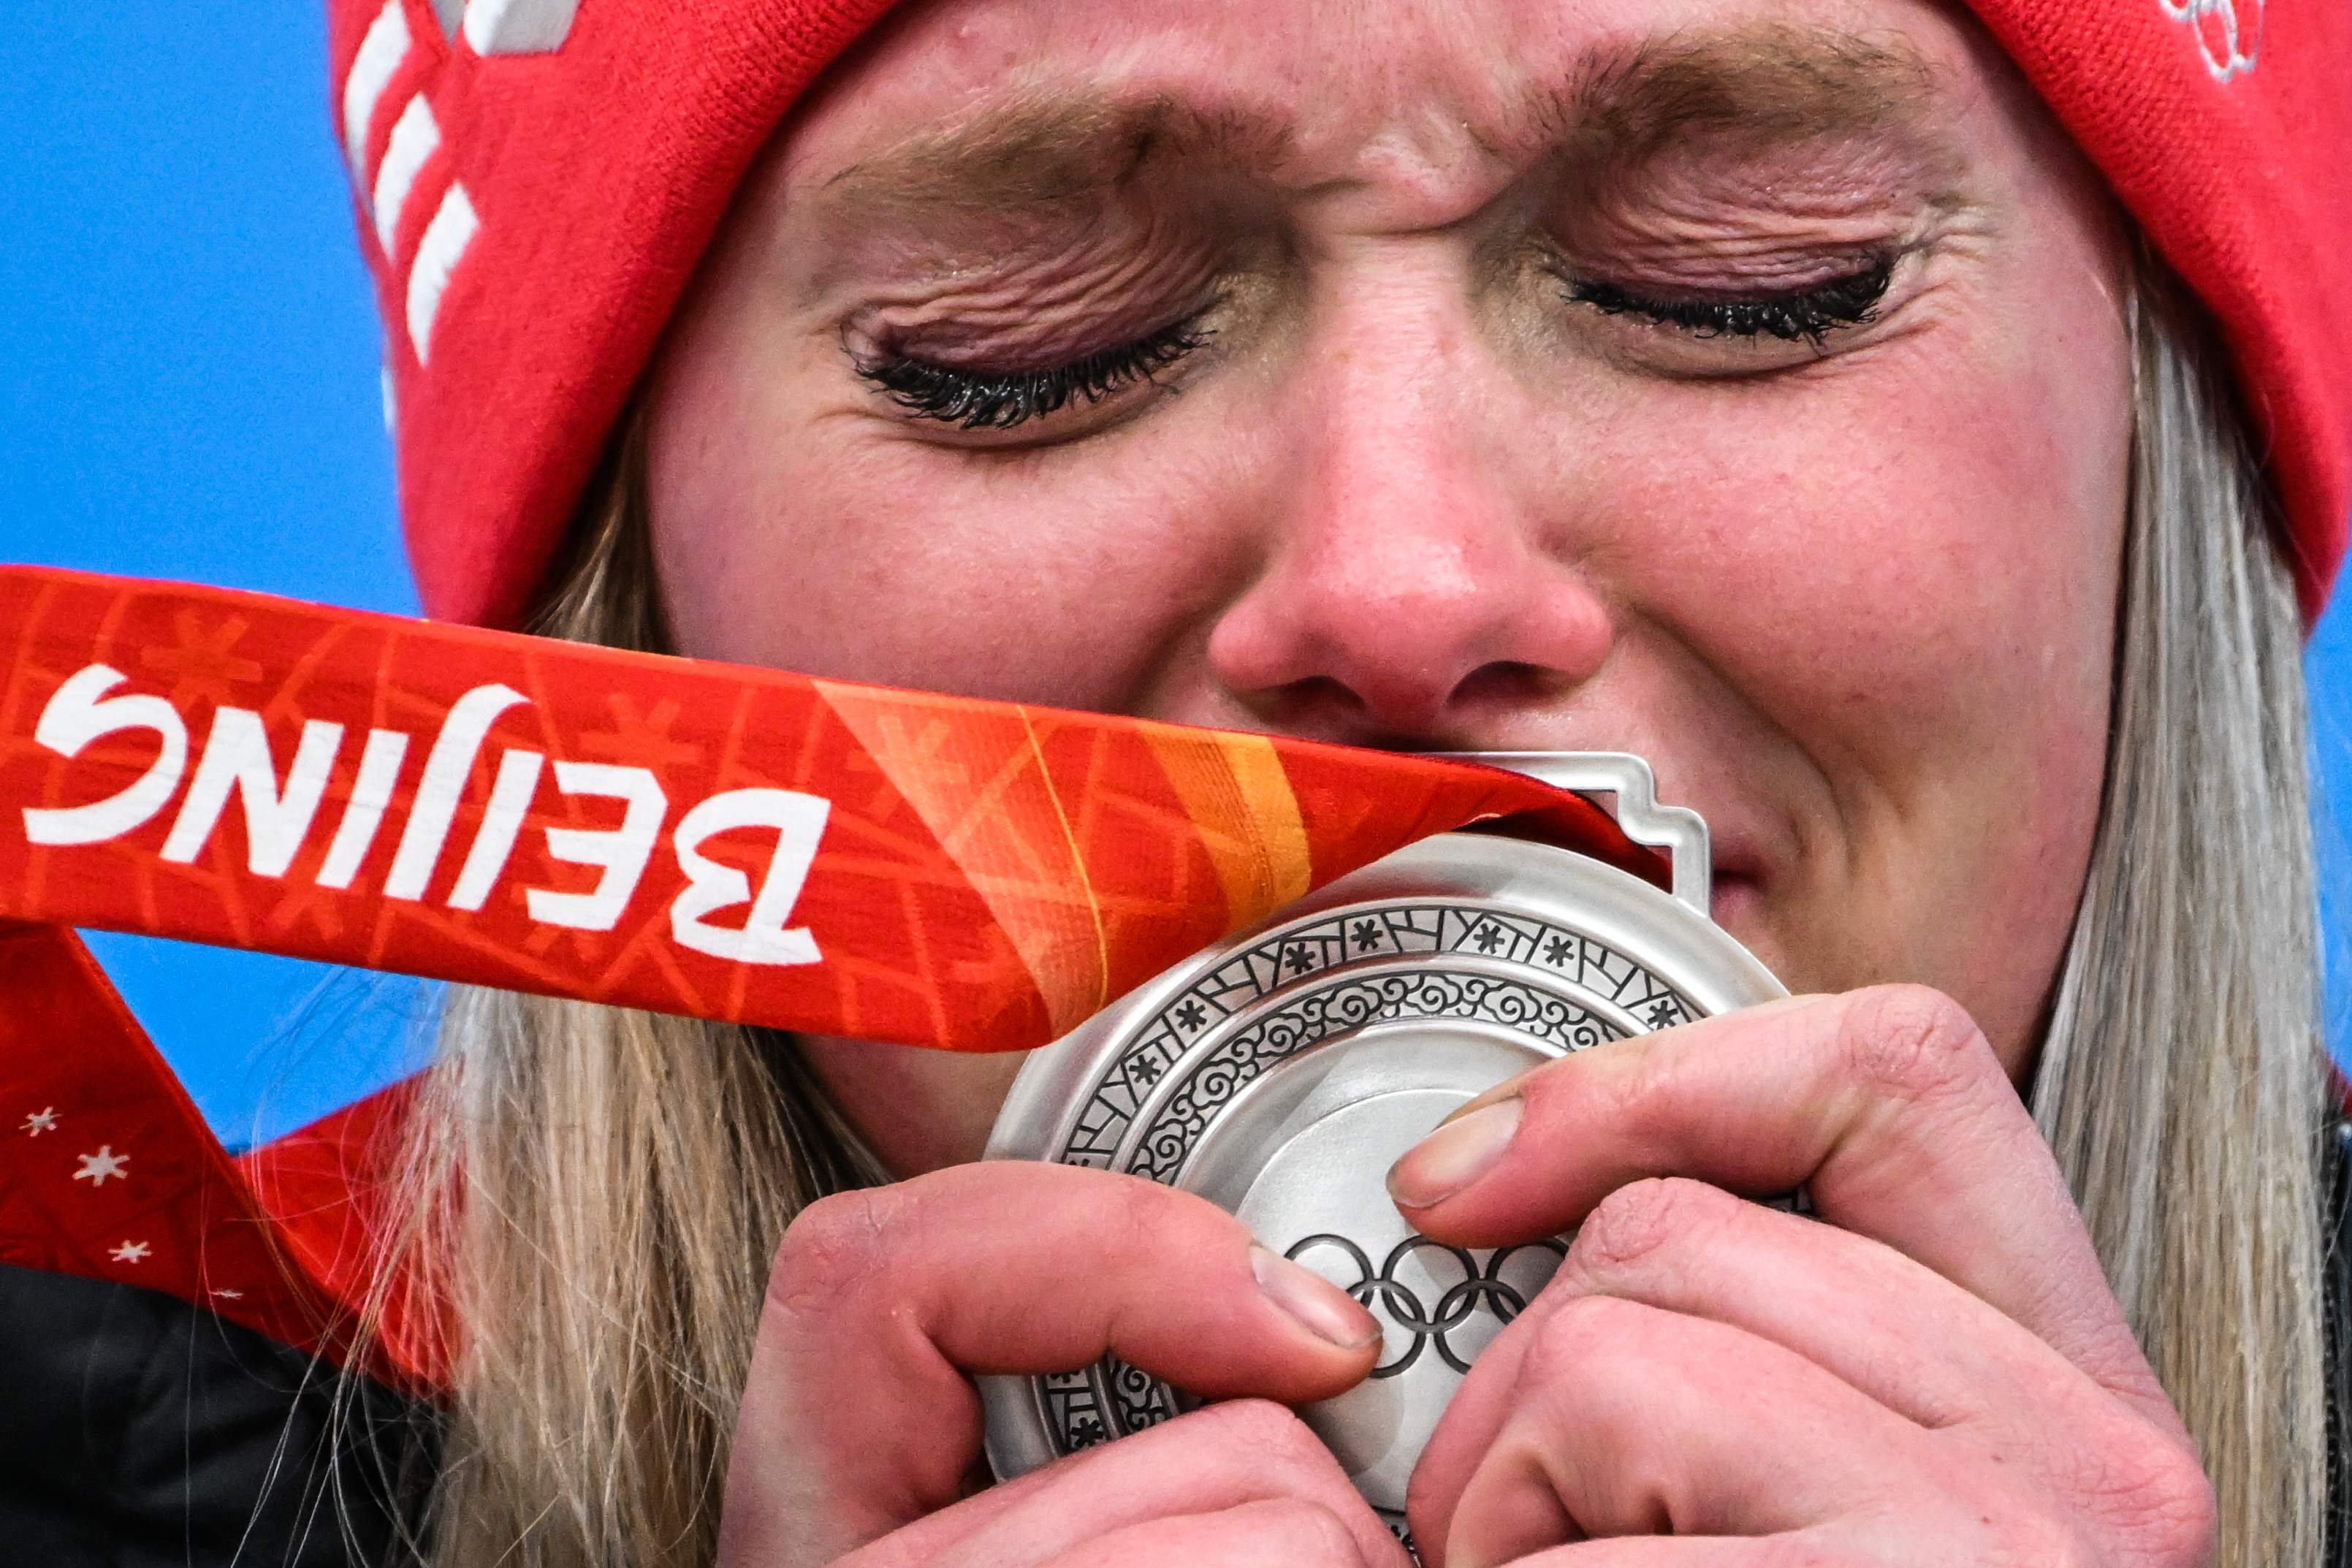 08.02.2022 Sliver medalist Germany's Anna Berreiter reacts during the medal ceremony after the women's singles luge event of the Beijing 2022 Winter Olympic Games at the National Sliding Centre in Yanqing, China. Vladimir Astapkovich / Sputnik